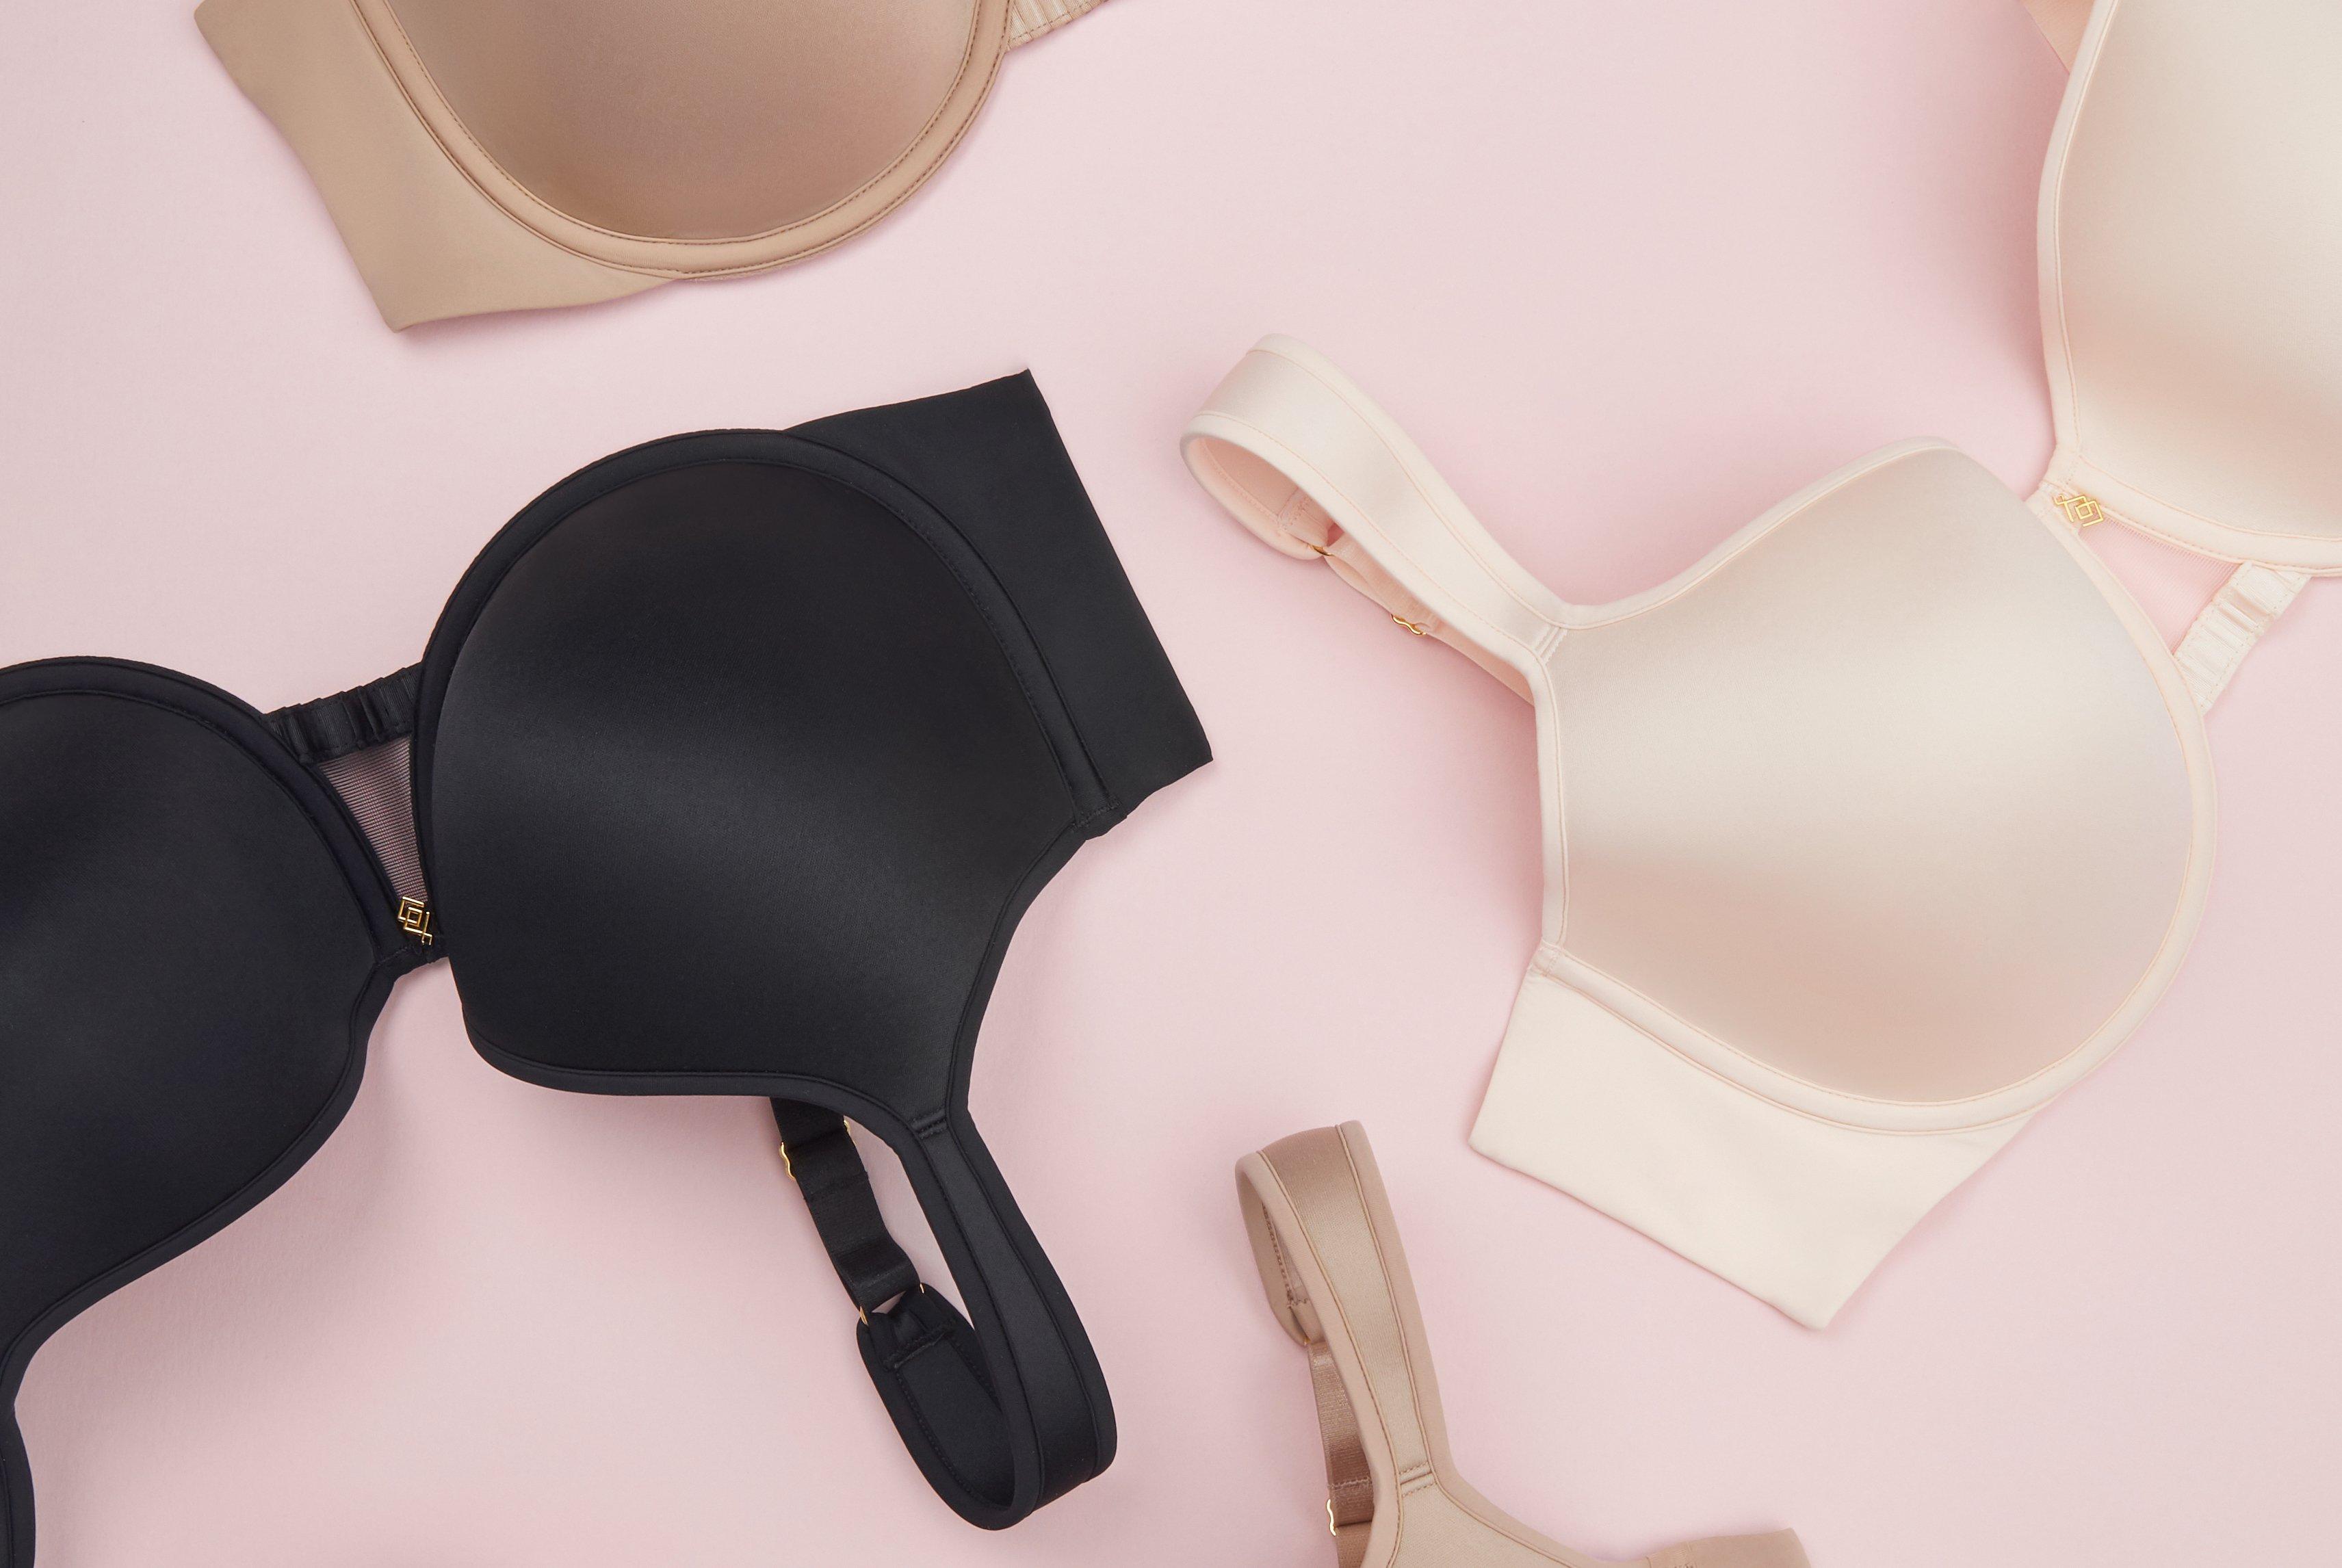 What Your Favorite Bra Colors Say About You - Bra Colors And Their Meanings  - ThirdLove